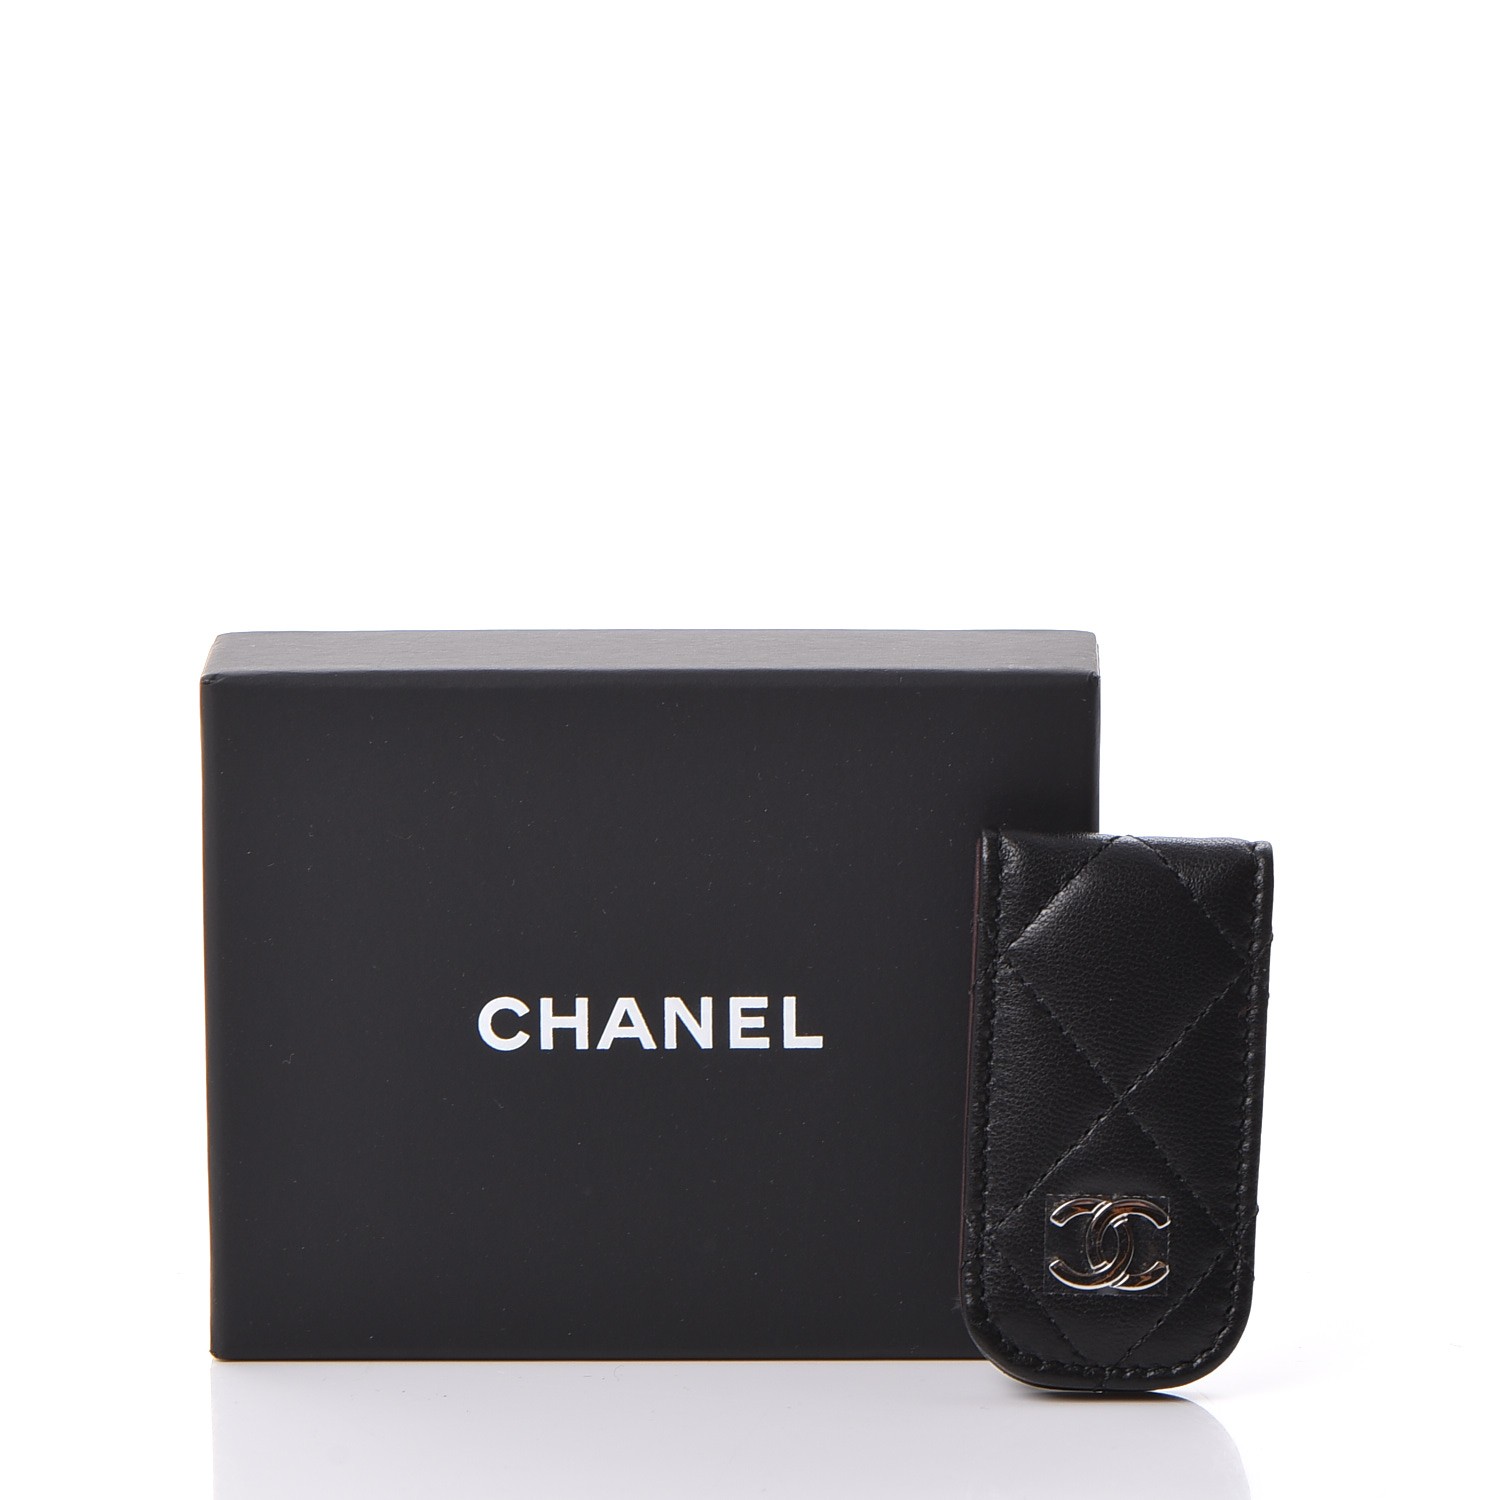 CHANEL Lambskin Quilted Money Clip Black 245506 | FASHIONPHILE